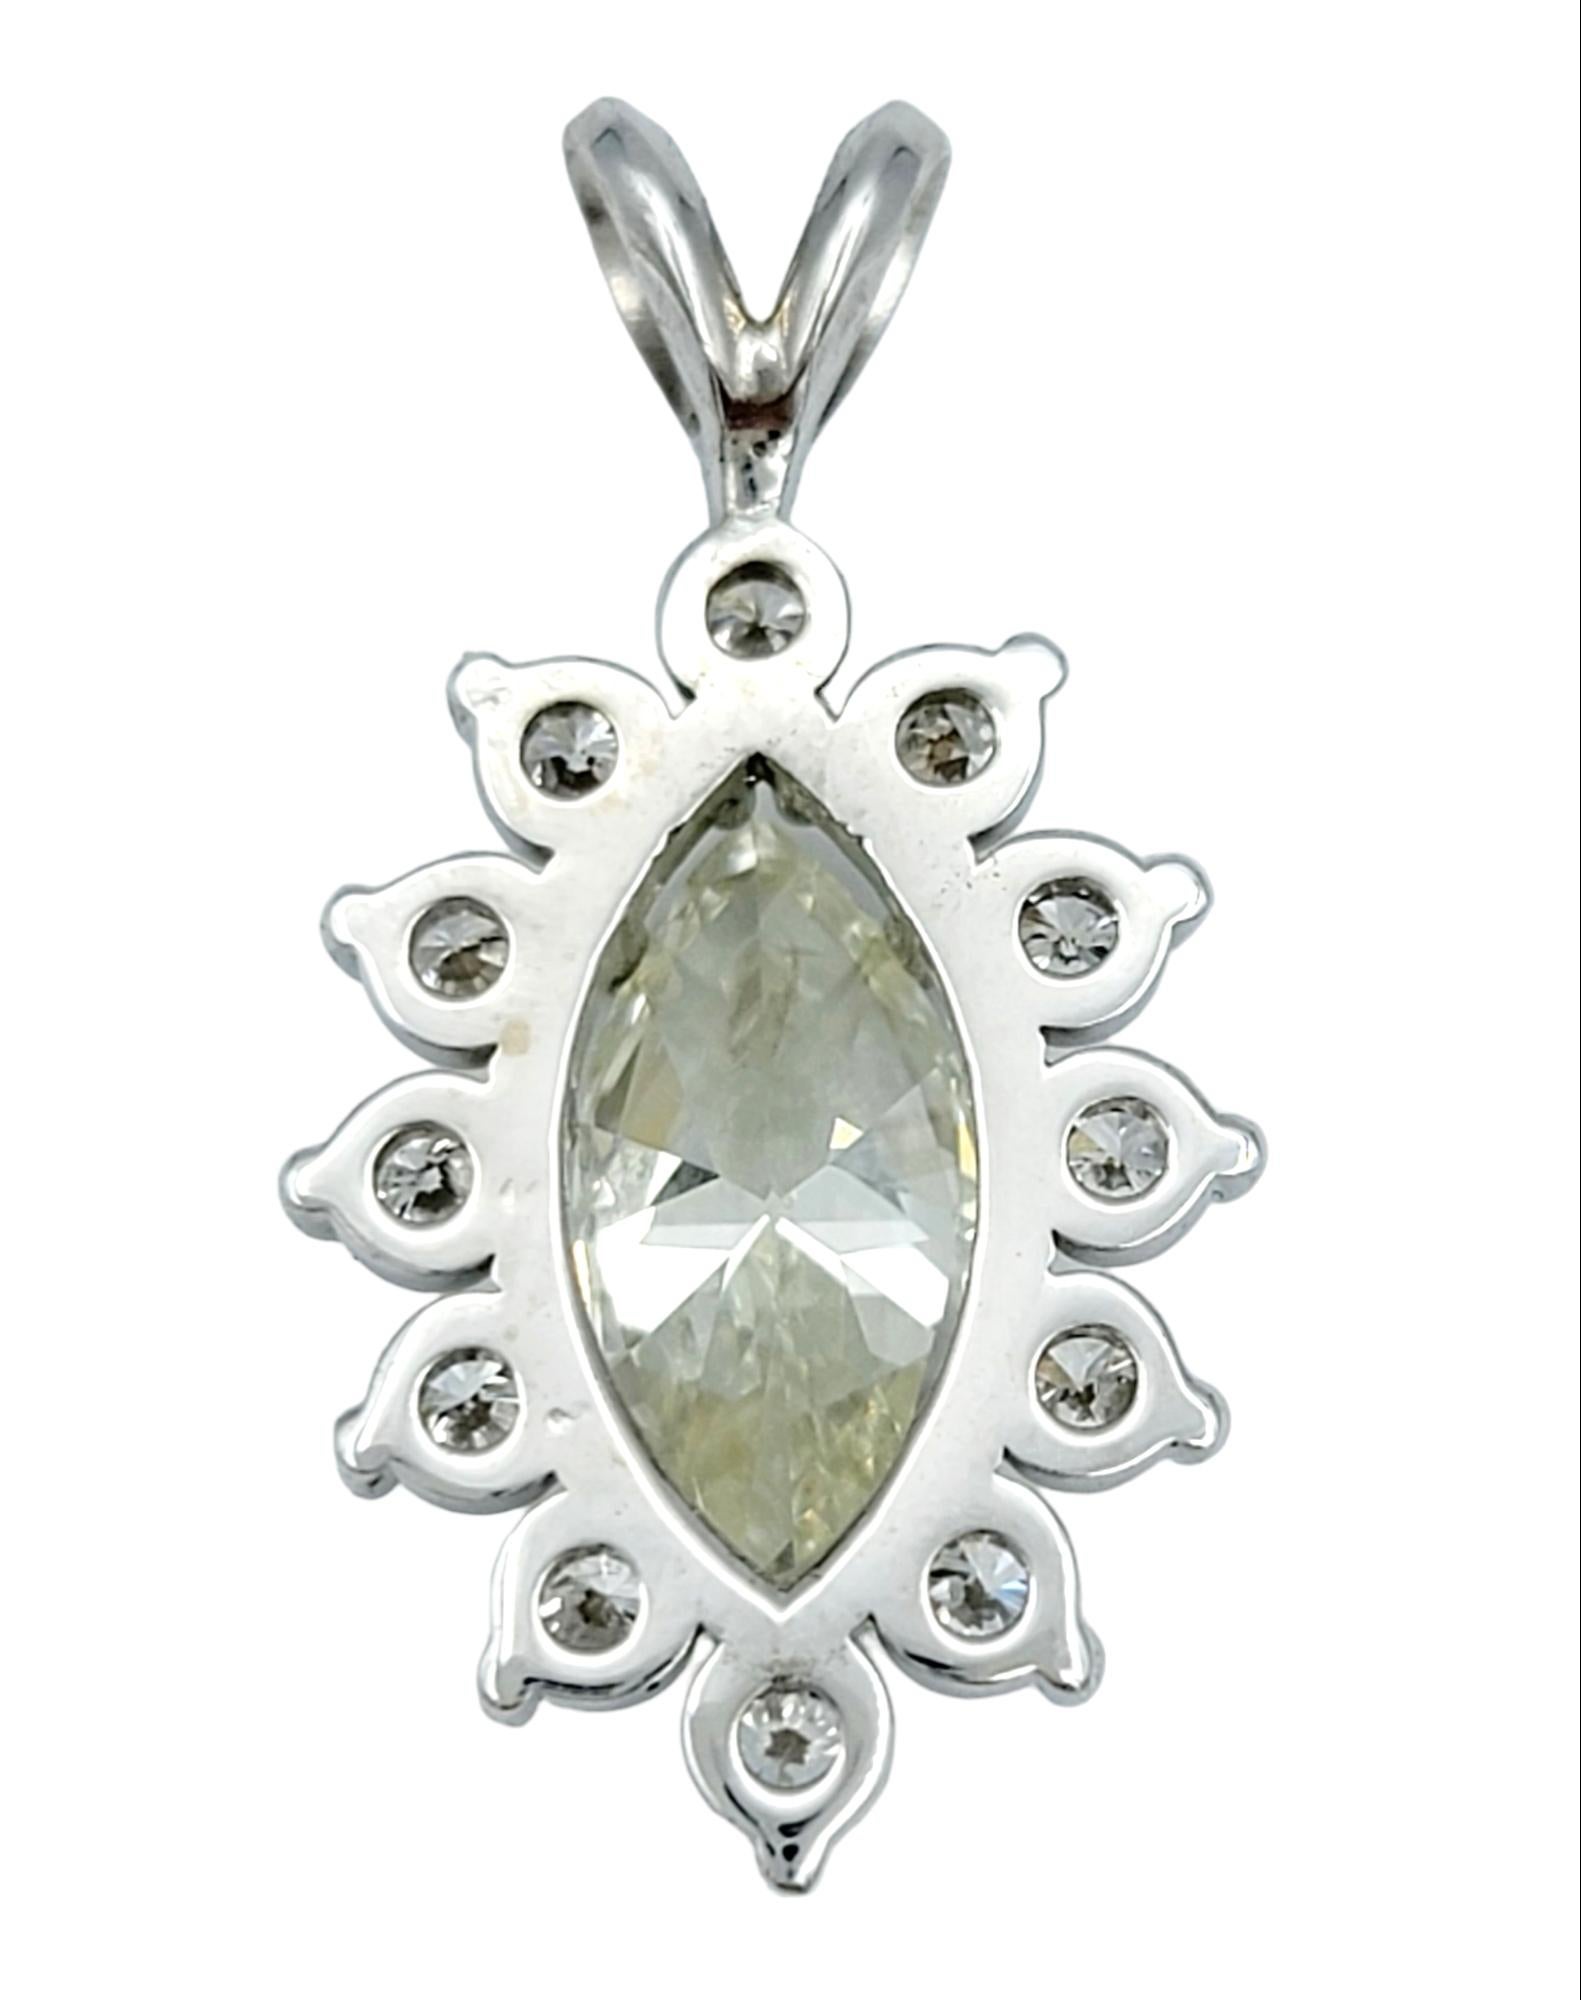 Marquise Cut Diamond Pendant with Halo Set in Polished 14 Karat White Gold In Excellent Condition For Sale In Scottsdale, AZ